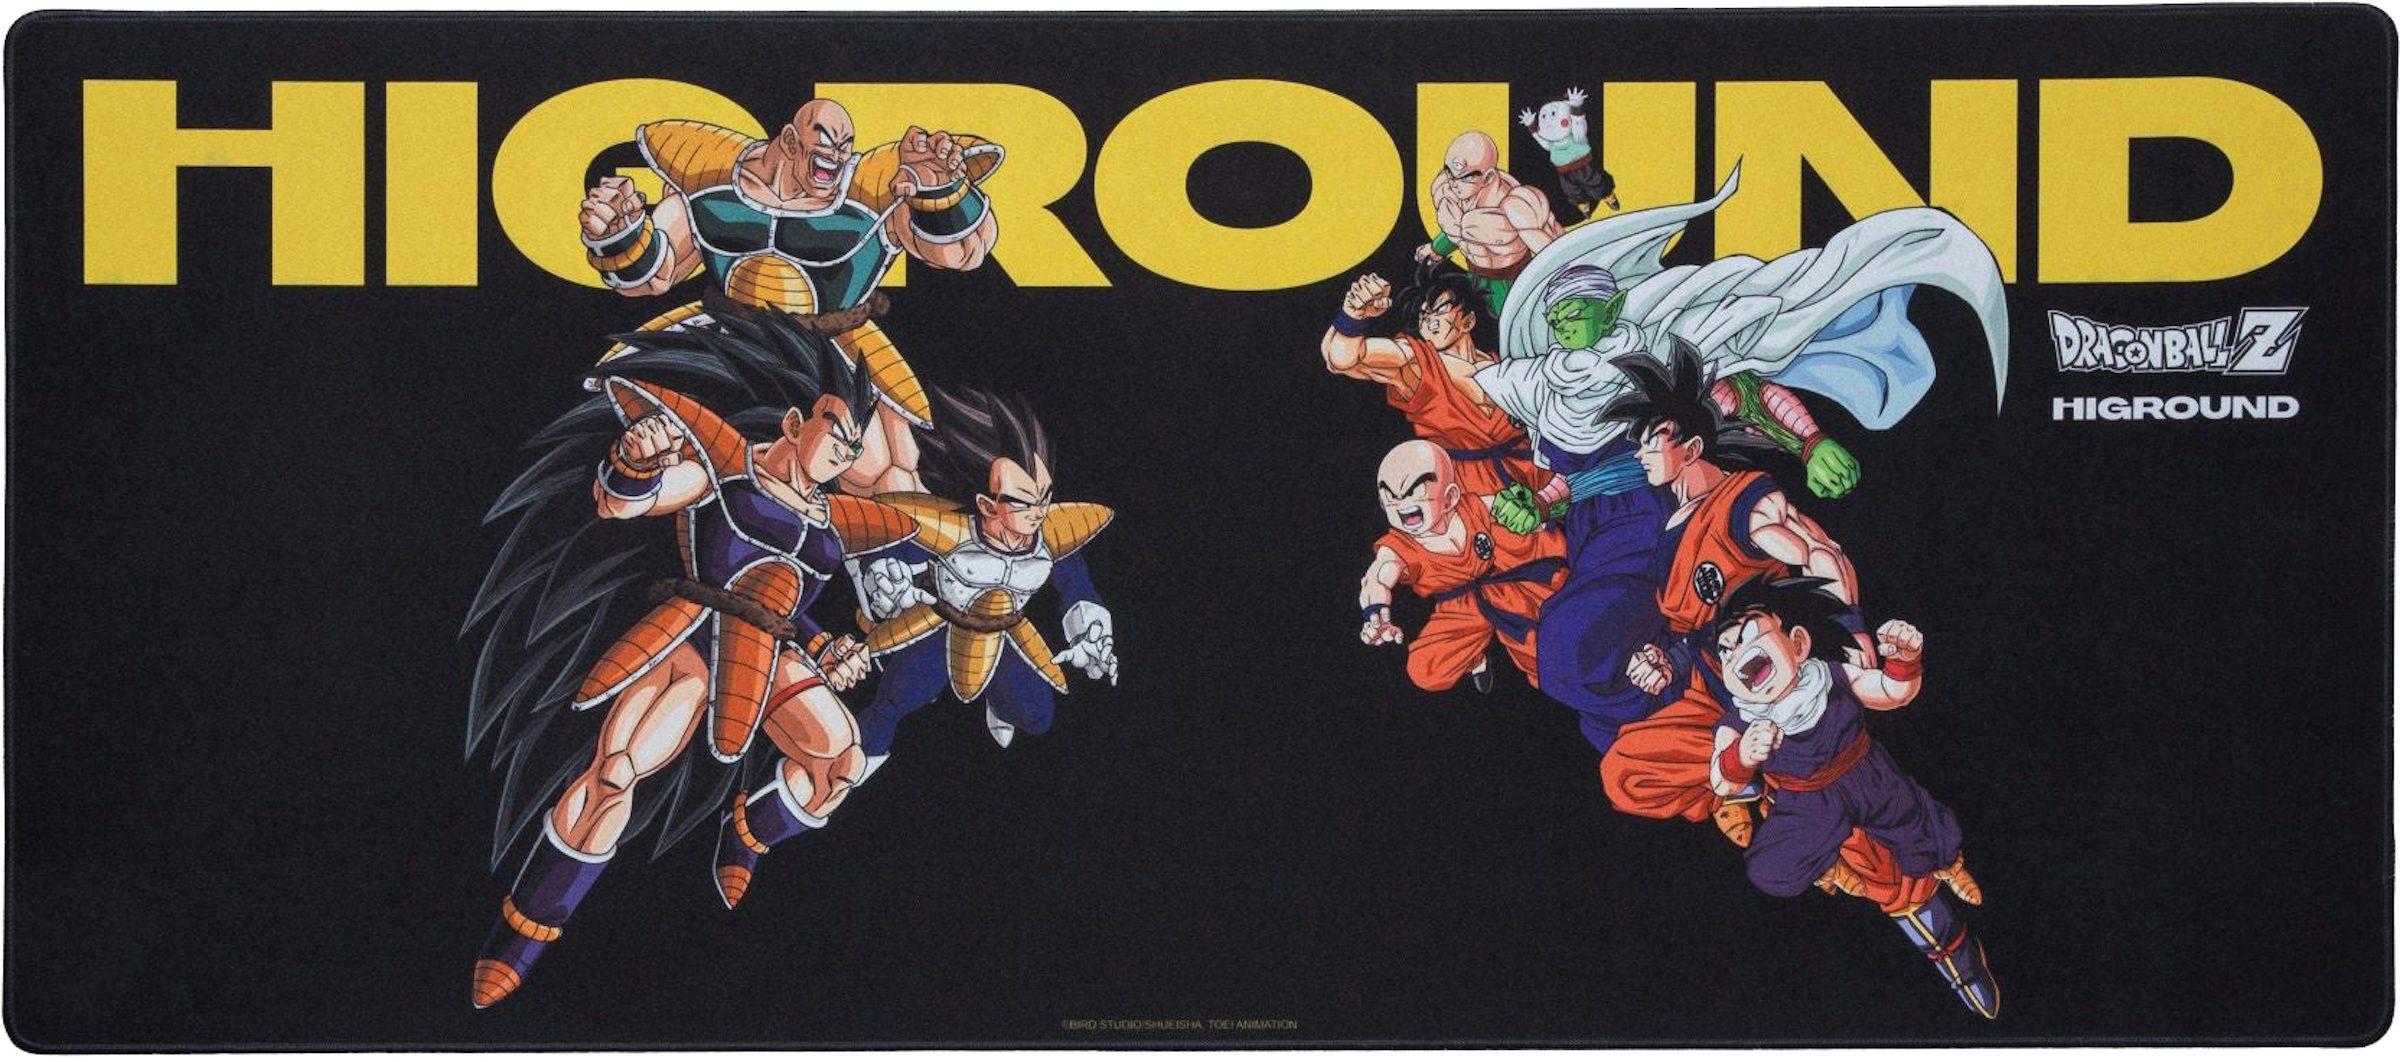 Dragon Ball Z x Higround 2 Summit65 4 Base65 4 Base65 Performance 5  Mousepads 1 Jellybag Limited Drop 8.30 12 PM PT Get Early Access.…